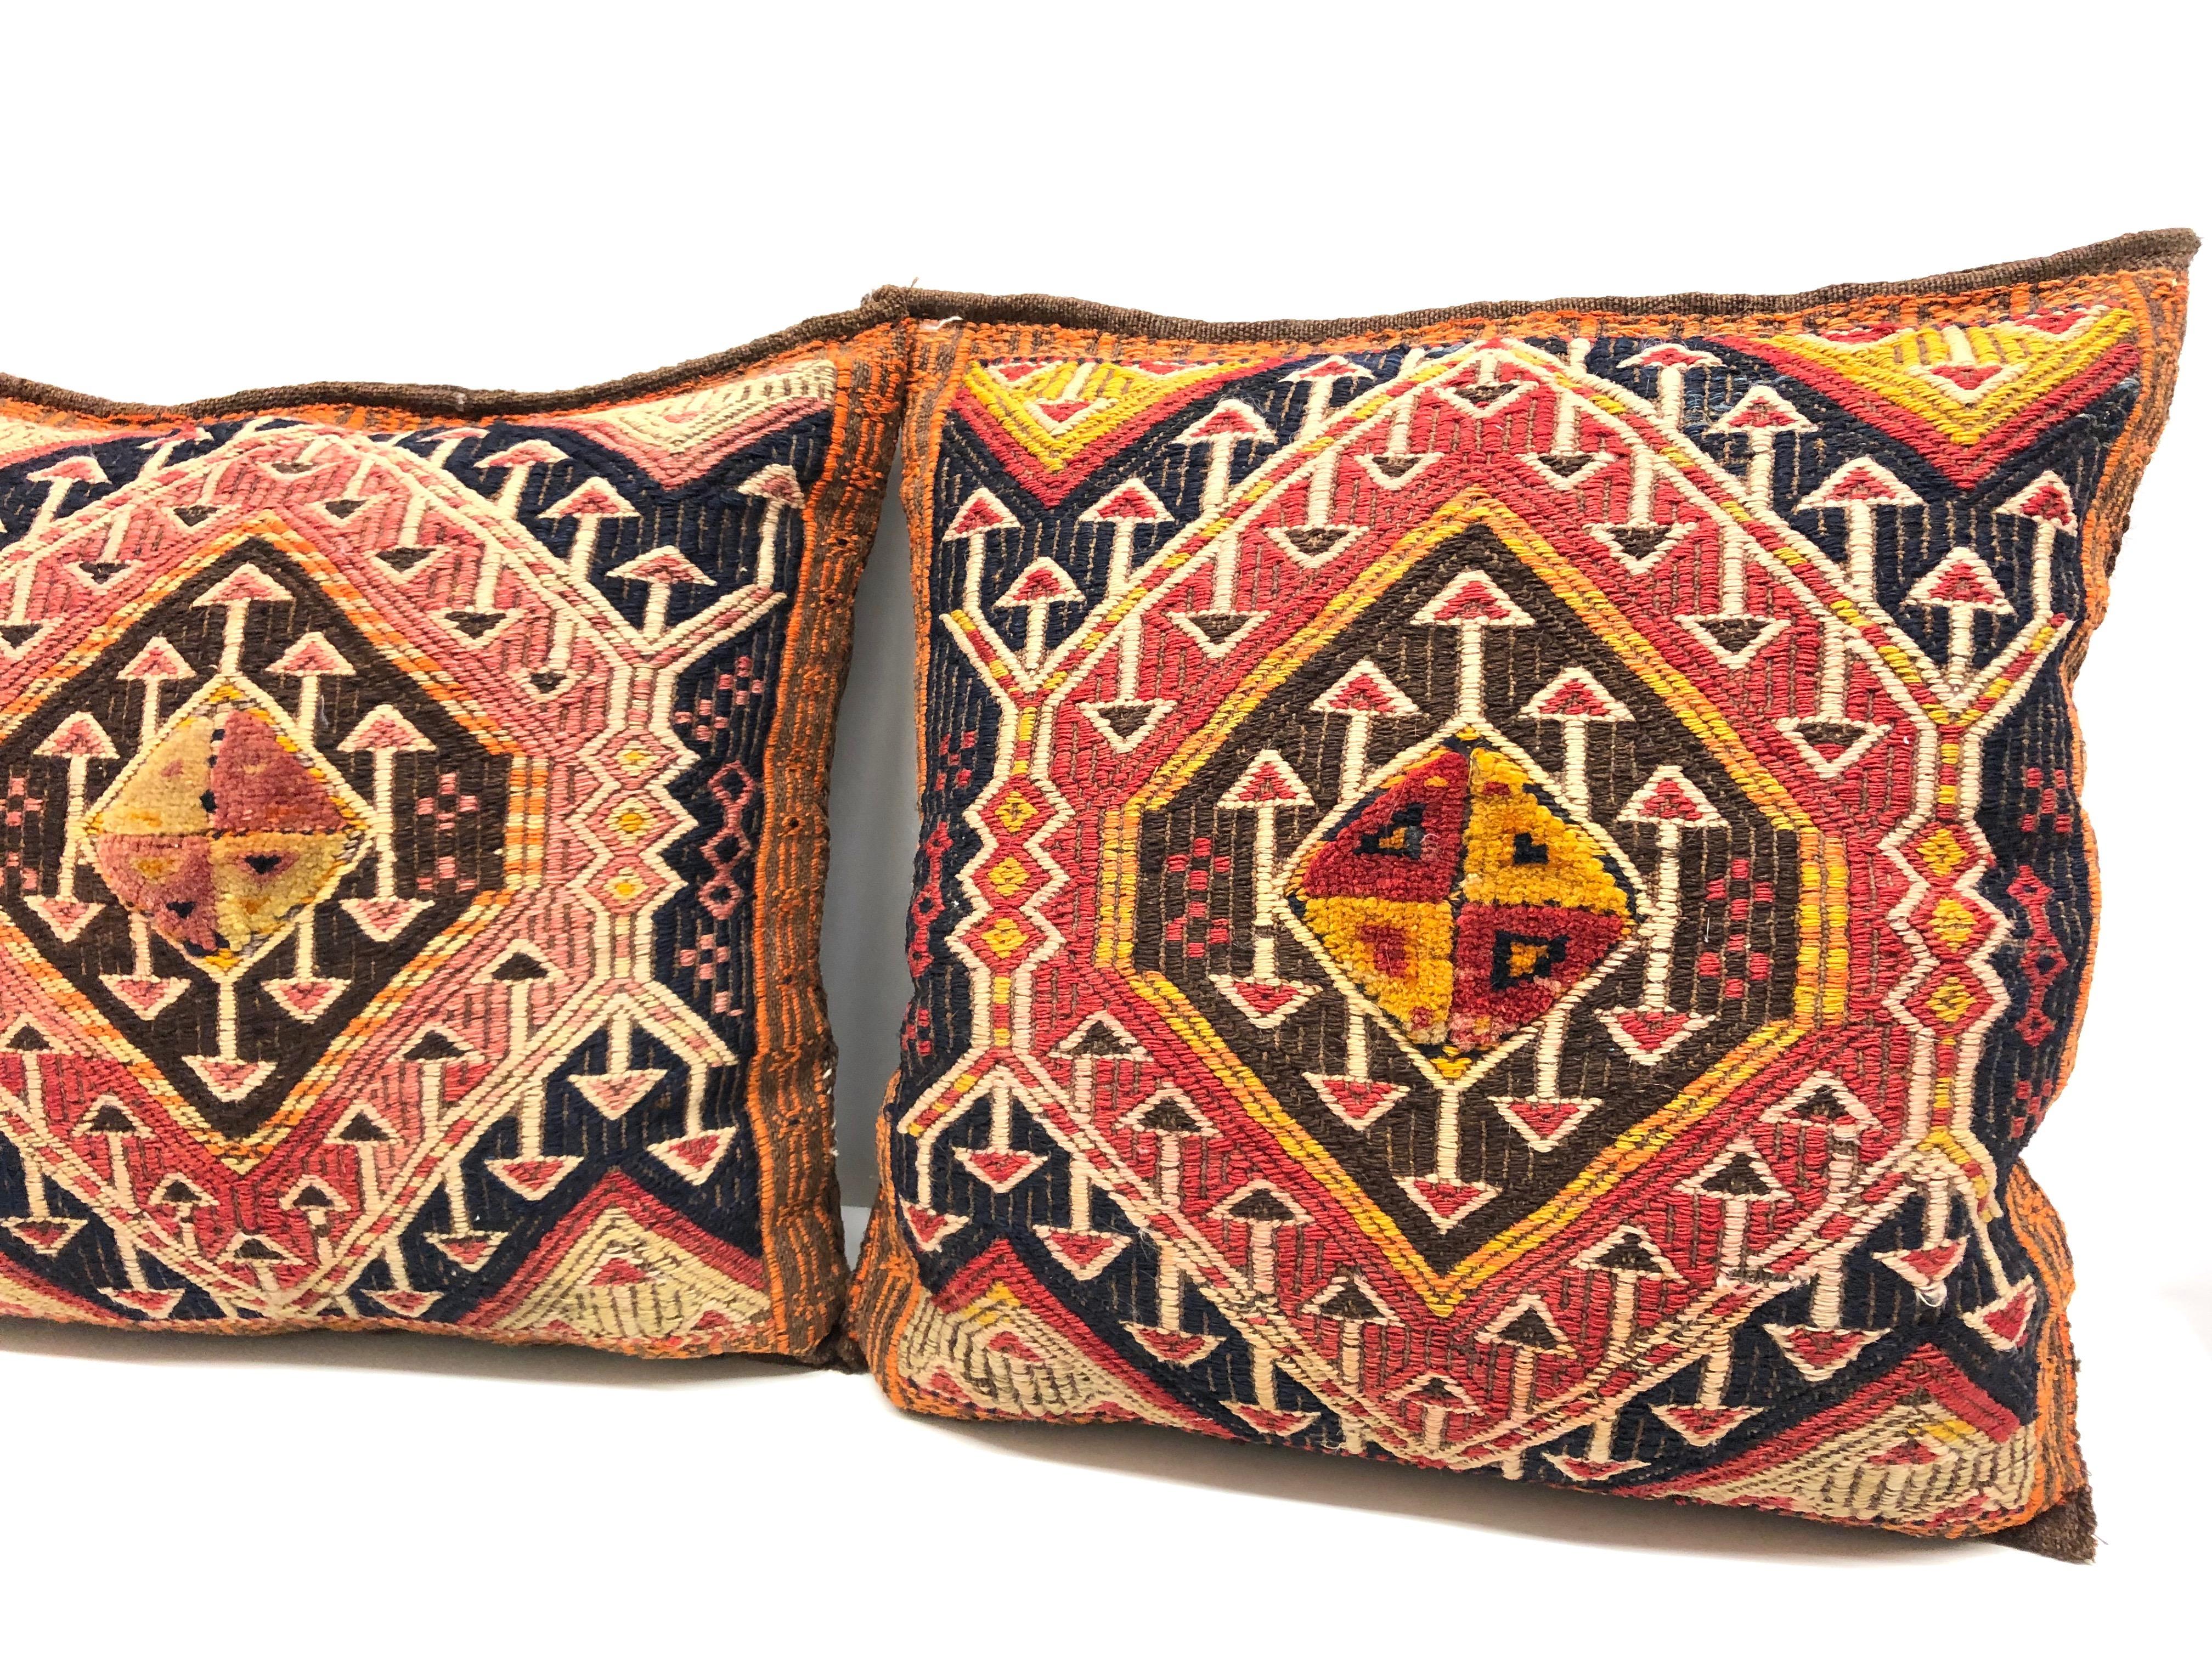 Pair of Gypsy Turkish Oriental Salt Bag or Rug Embroidery Pillows In Good Condition For Sale In Nuernberg, DE